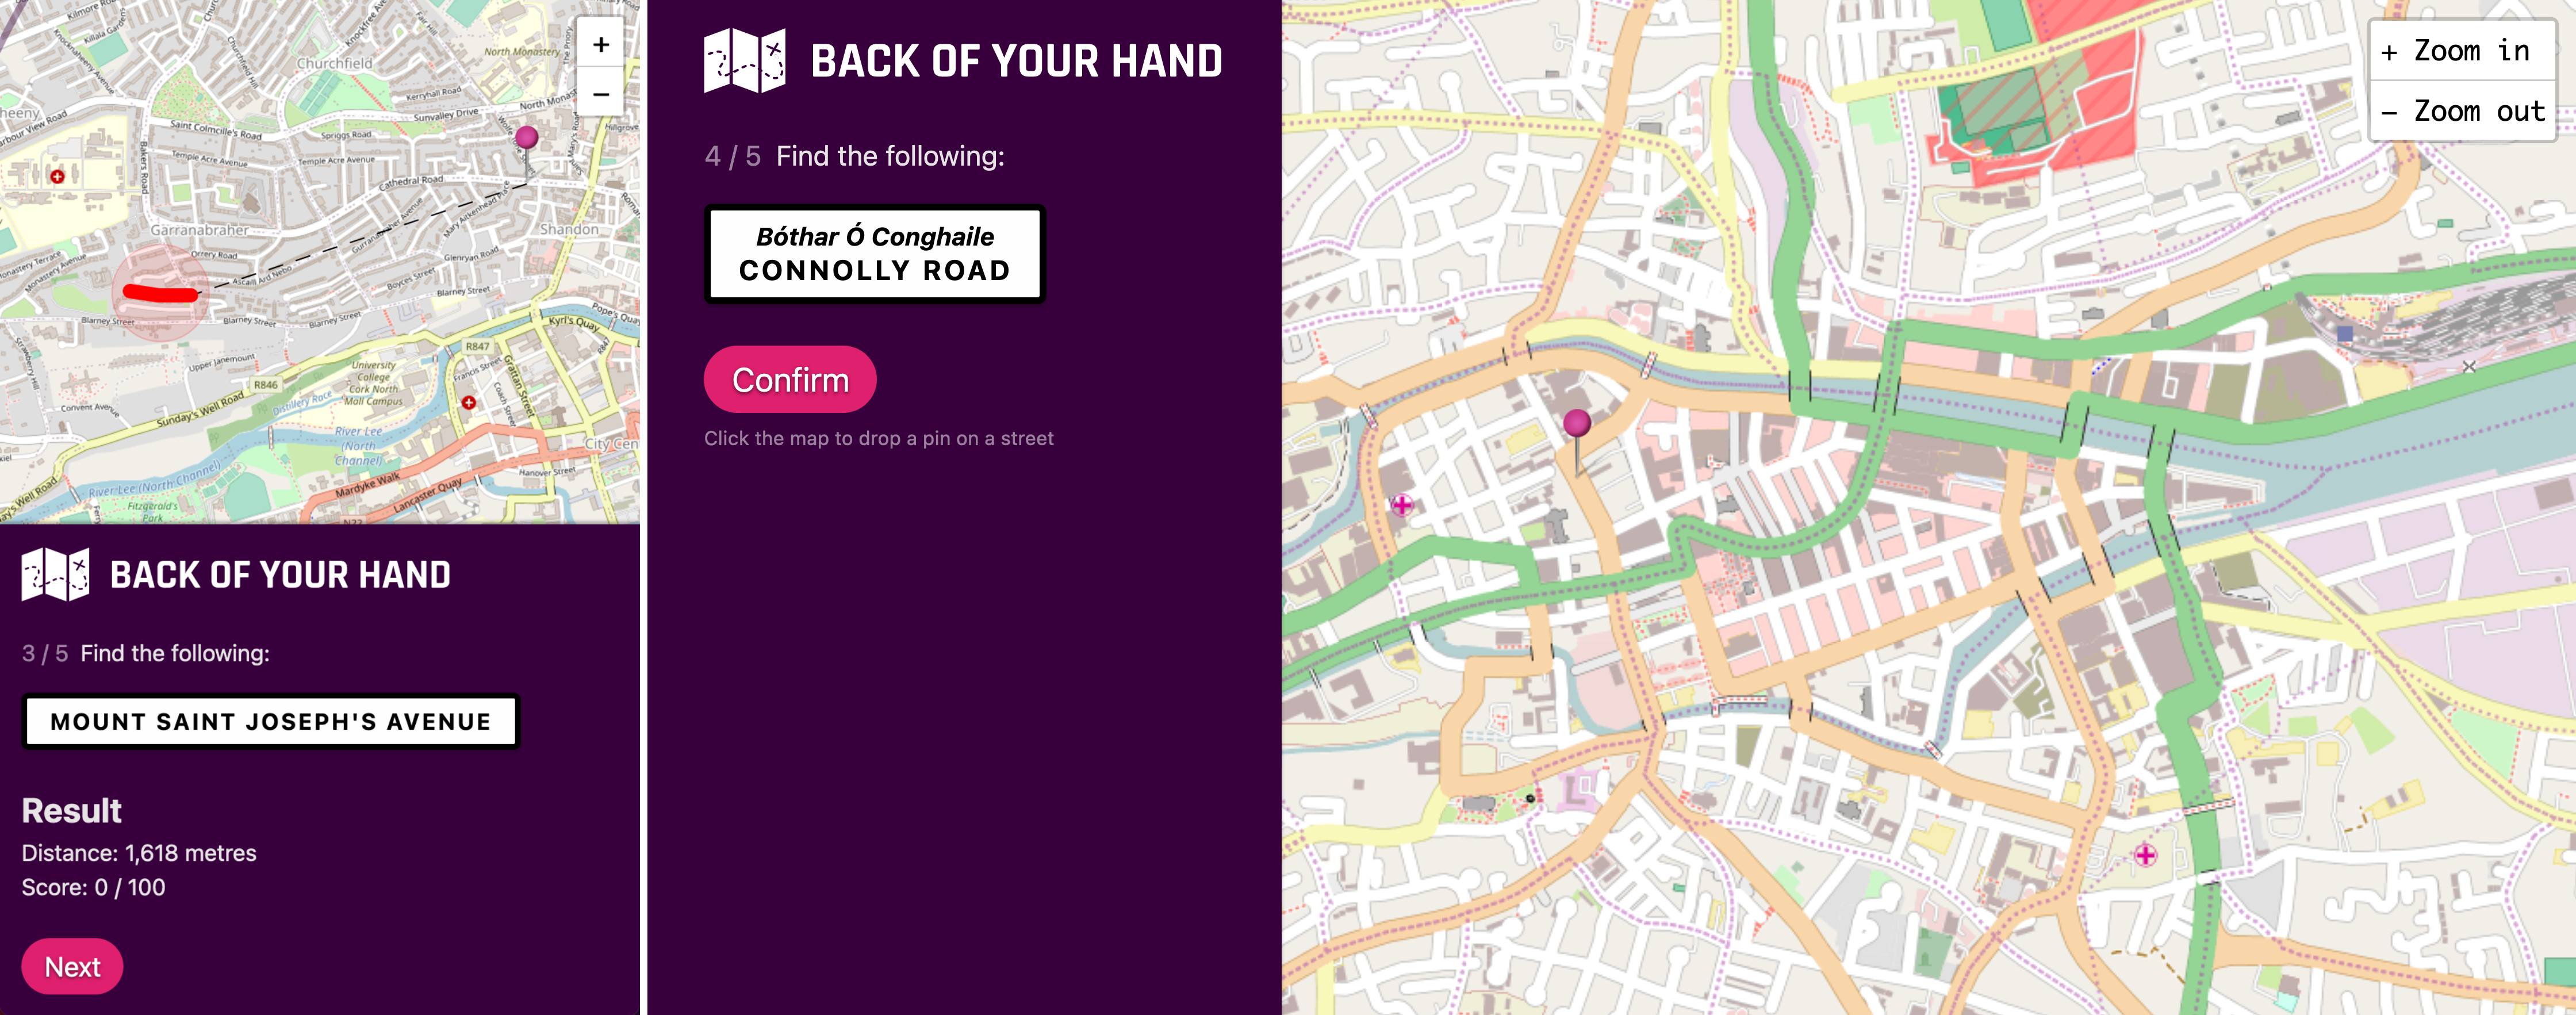 Screenshots of the game; one narrow / mobile sized, one desktop sized. In one, the user is asked to find a particular street, but they haven't placed a marker / guess on the map yet. The other is an example where the result of a guess is being shown (i.e. the street is revealed and the distance is shown, etc.)